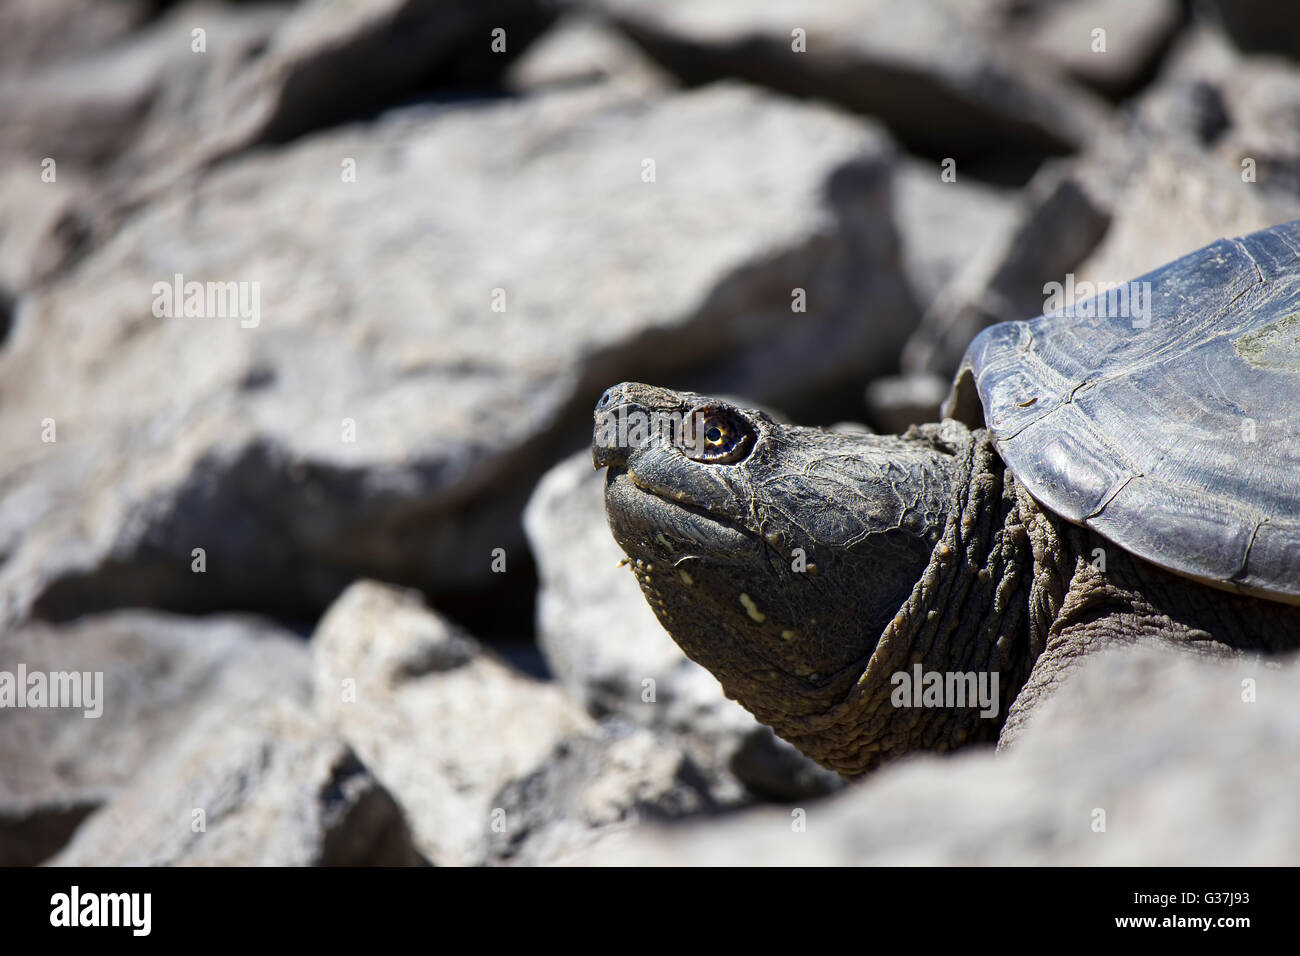 Freshwater snapping turtle Stock Photo